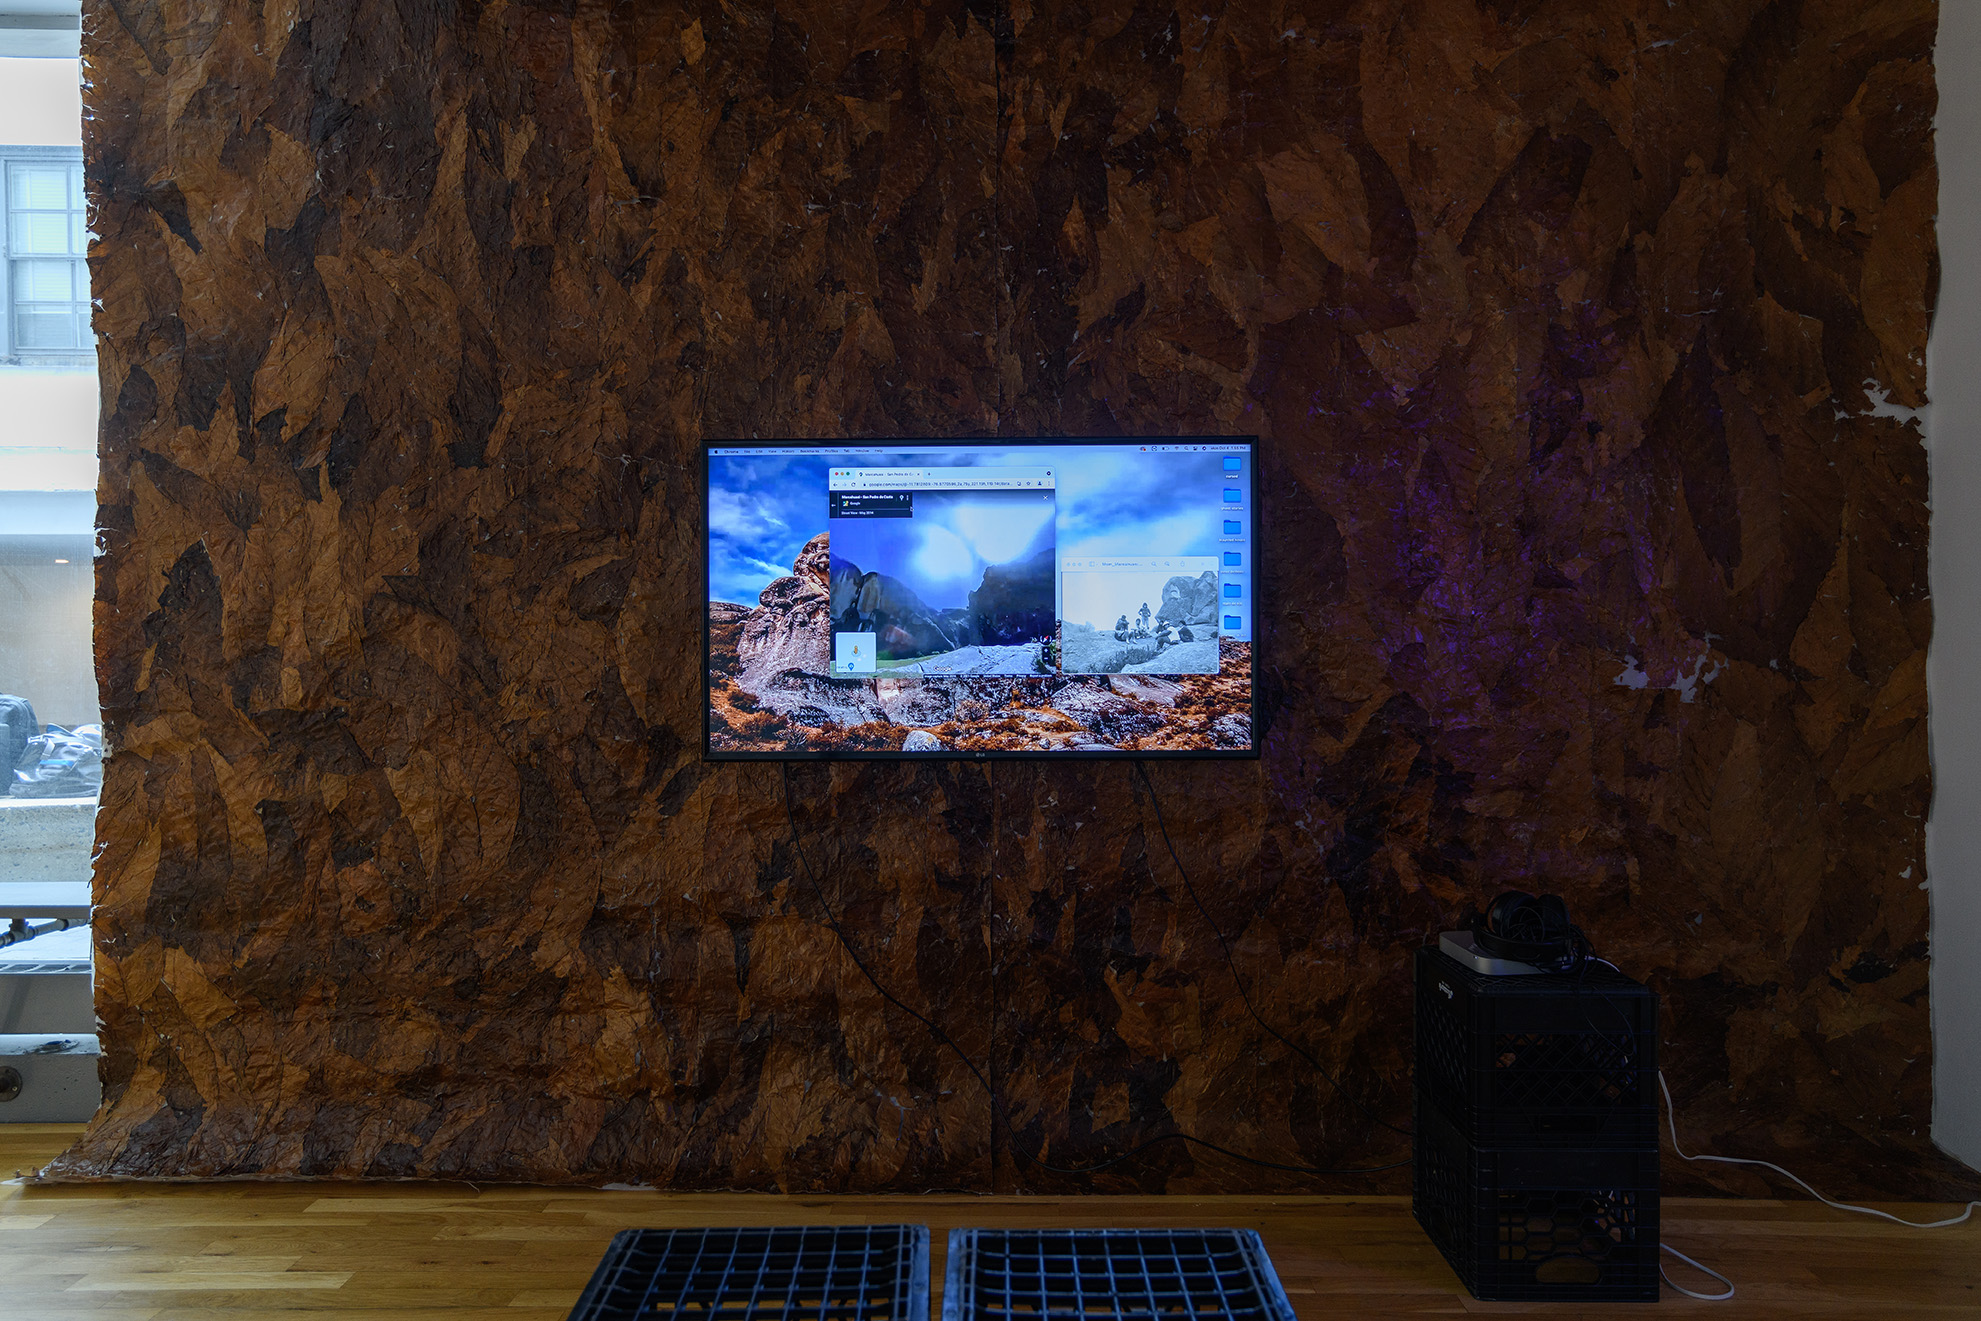 [A rectangular, flatscreen TV monitor hangs on top of a wall covered in dried, collaged tobacco leaves. The screen is predominantly blue. It depicts a desktop of a Mac computer screen. There are six blue folder icons stacked vertically on the right hand side of the screen. The center of the screen shows one larger internet browser window open to a “live view” on GoogleMaps and a smaller window to its right showing a black and white photograph of what looks like five people sitting and standing on a large rock formation. The photo looks decades older than the image from GoogleMaps.]